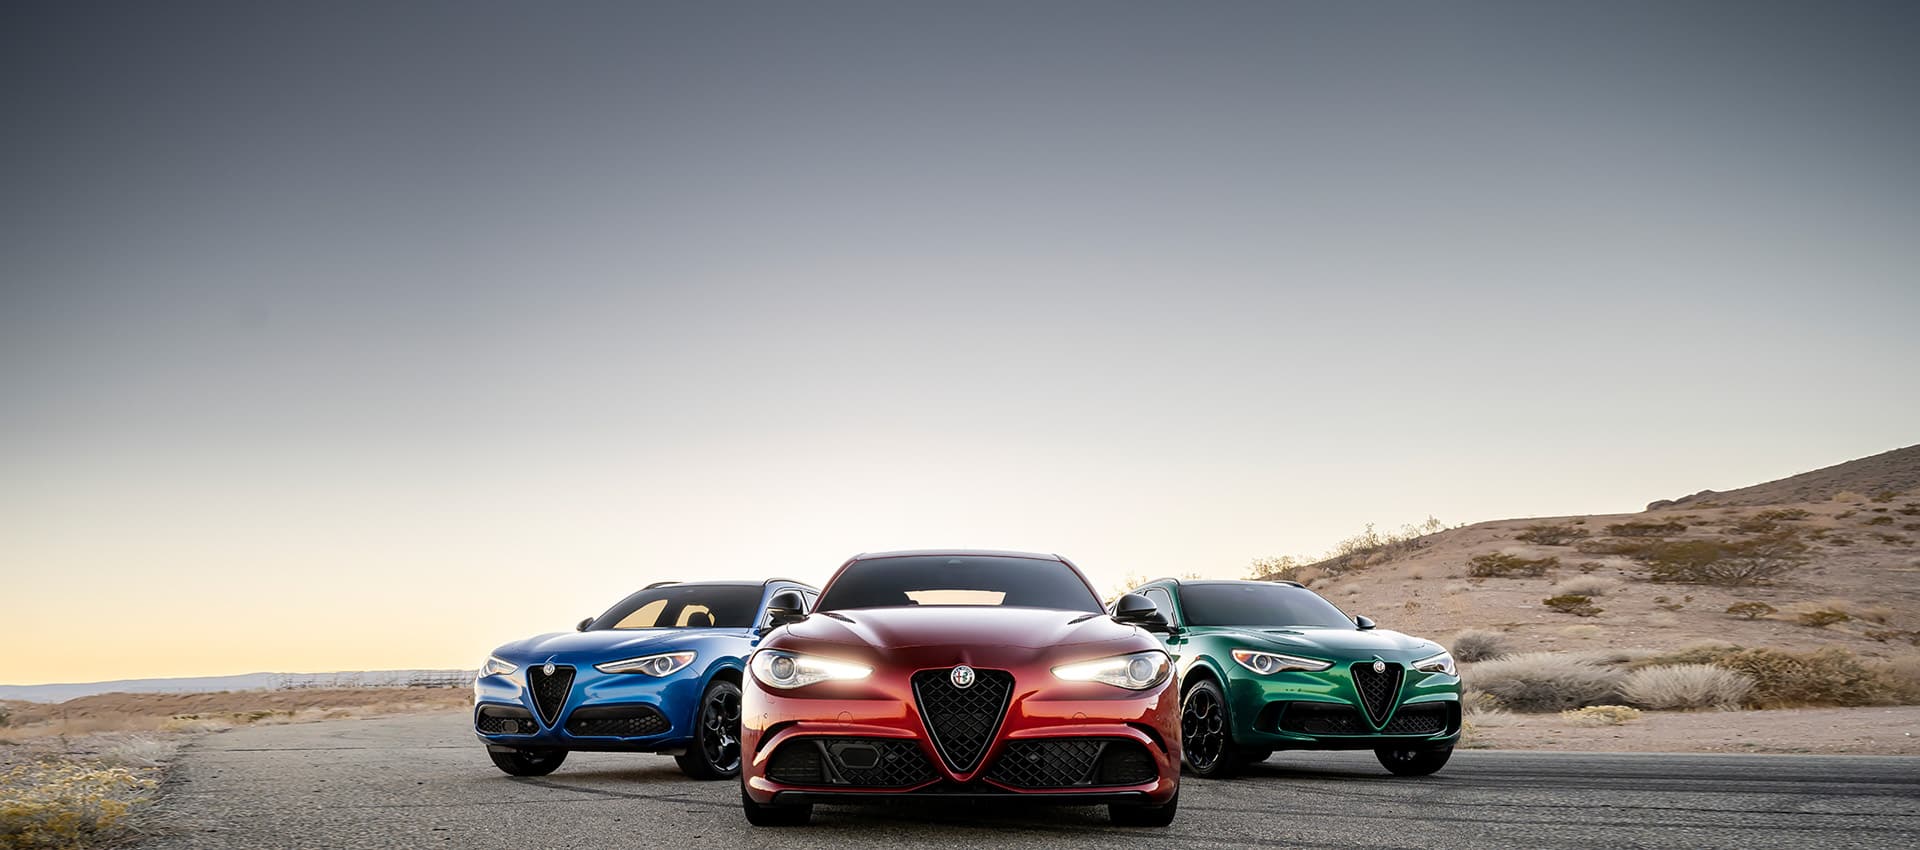 Three 2023 Alfa Romeo models parked beside a hill. From left to right: a blue 2023 Alfa Romeo Stelvio Quadrifoglio, a red 2023 Alfa Romeo Giulia Quadrifoglio and a green 2023 Alfa Romeo Stelvio Quadrifoglio.